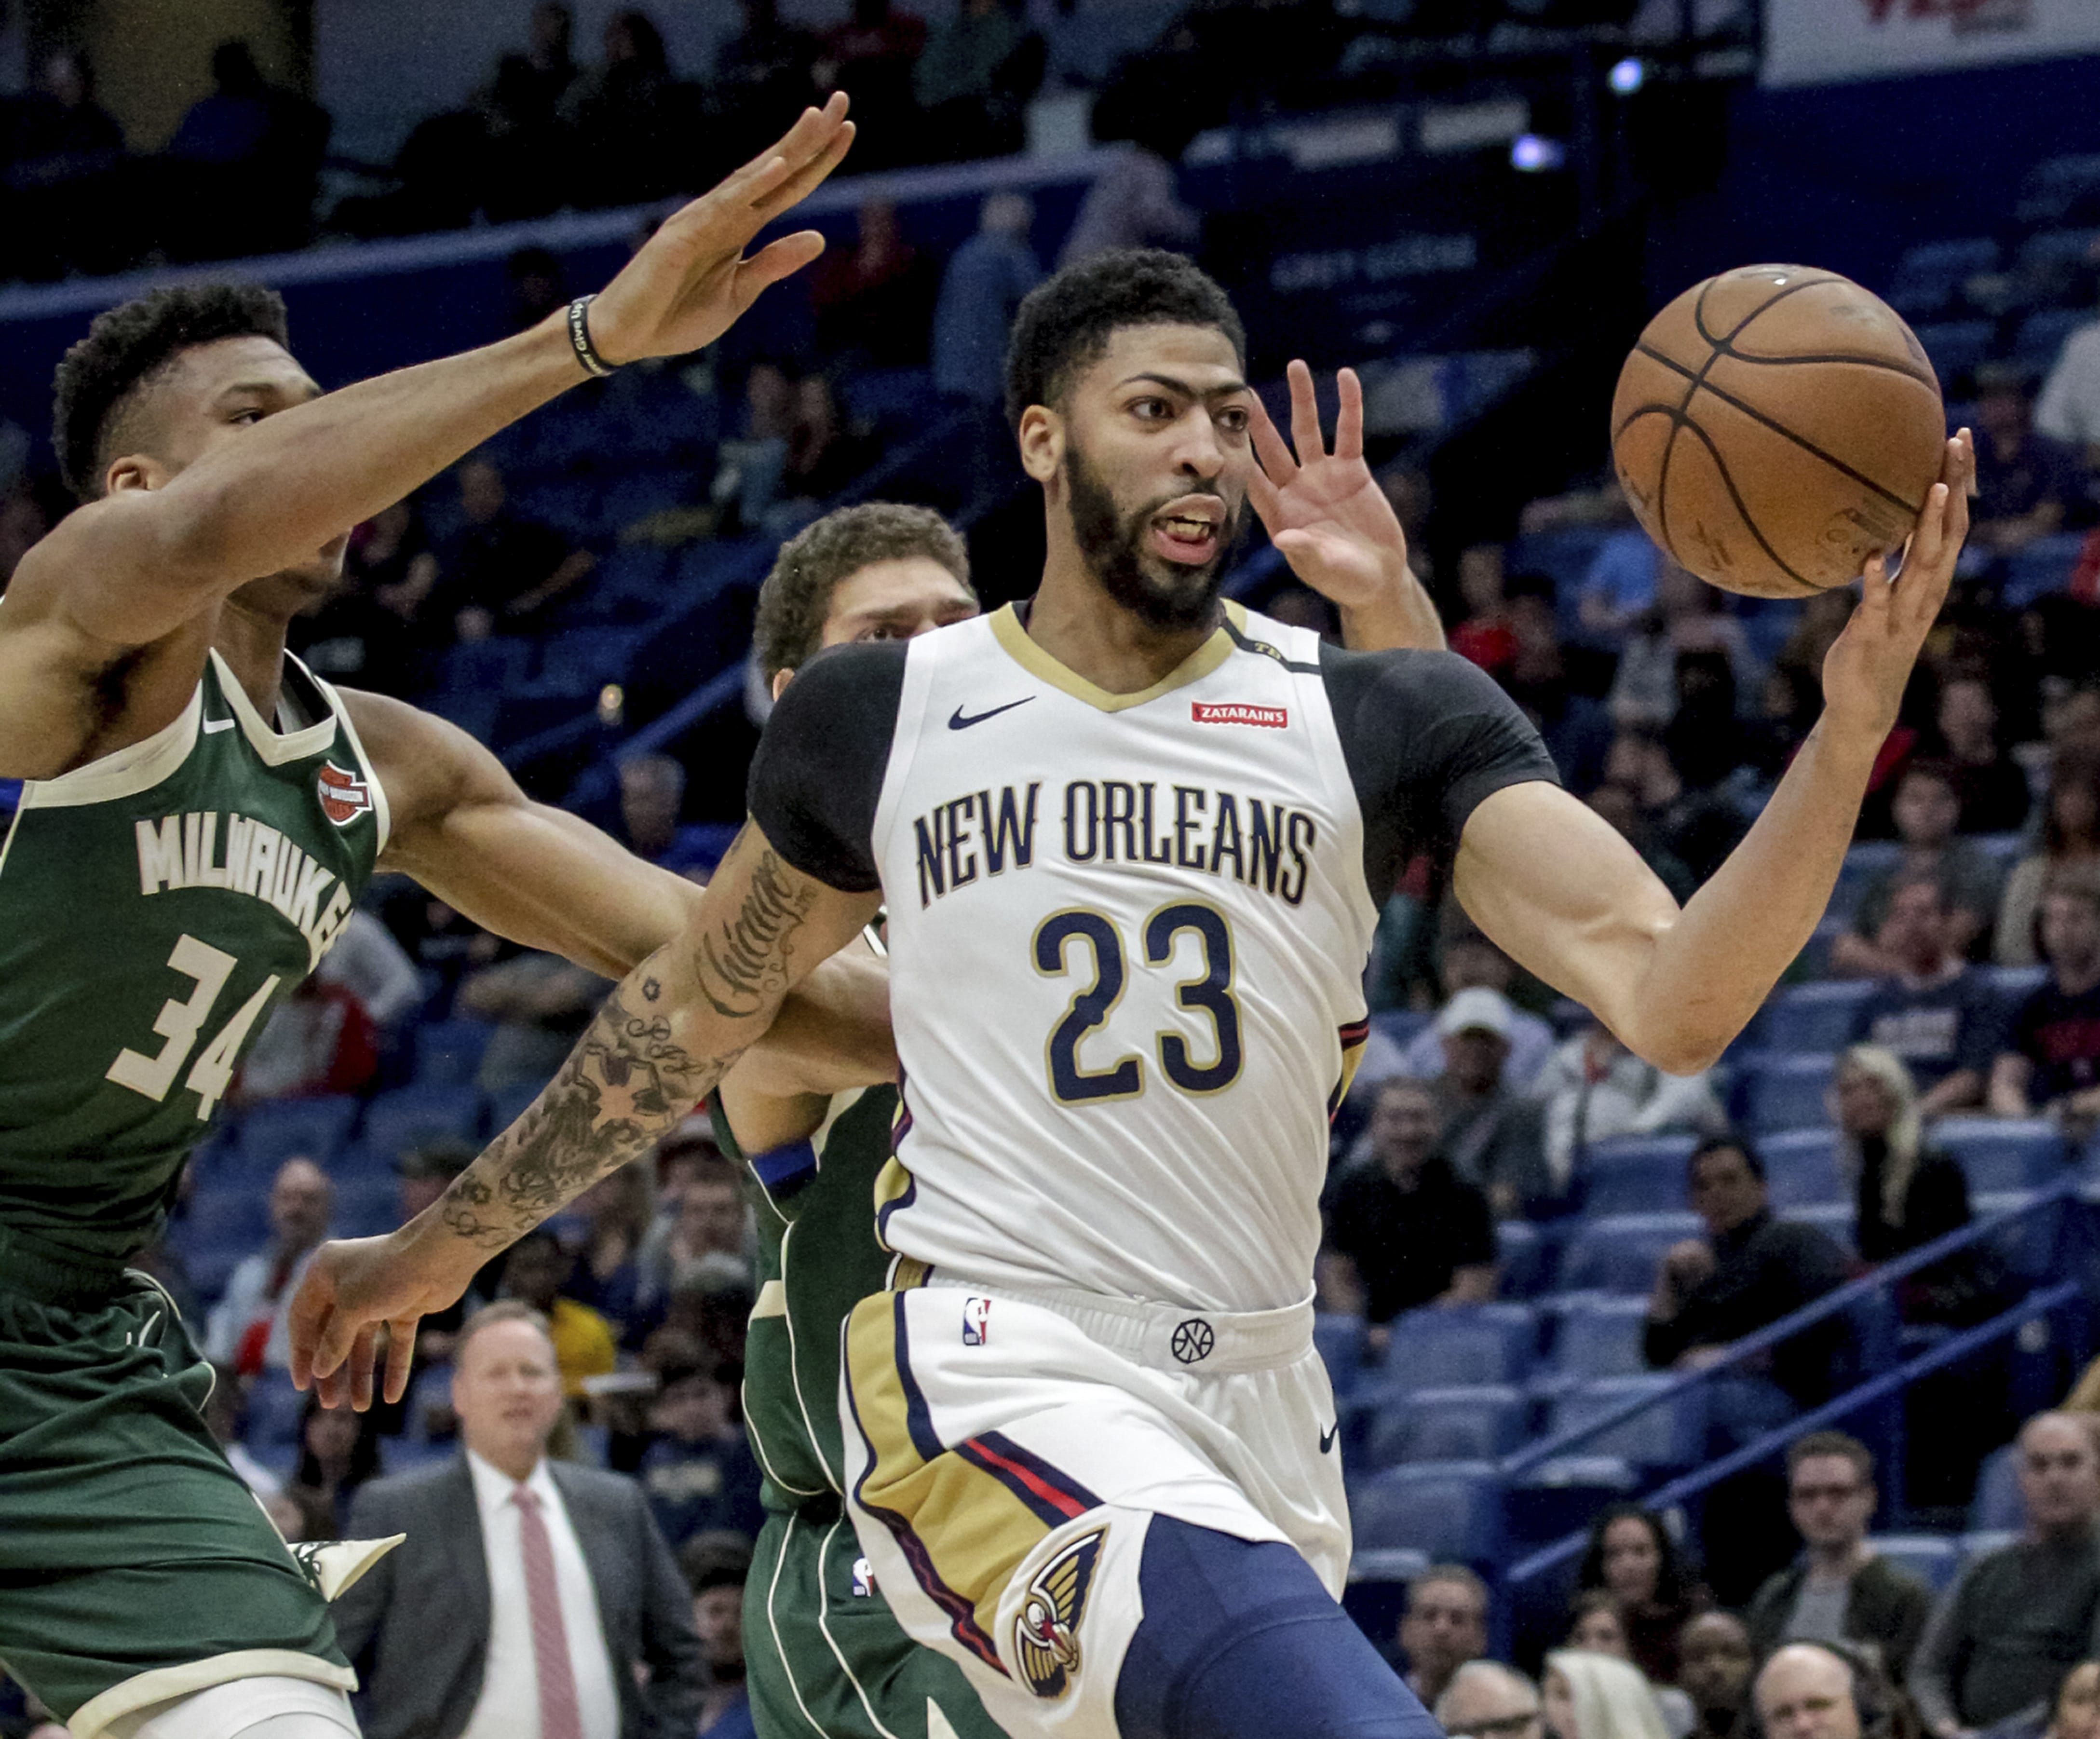 The New Orleans Pelicans have agreed to trade Anthony Davis (23) to the Los Angeles Lakers for point guard Lonzo Ball, forward Brandon Ingram, shooting guard Josh Hart and three first-round draft choices. The people spoke to The Associated Press on Saturday, June 15, 2019, on condition of anonymity because the trade cannot become official until the new league year begins July 6.